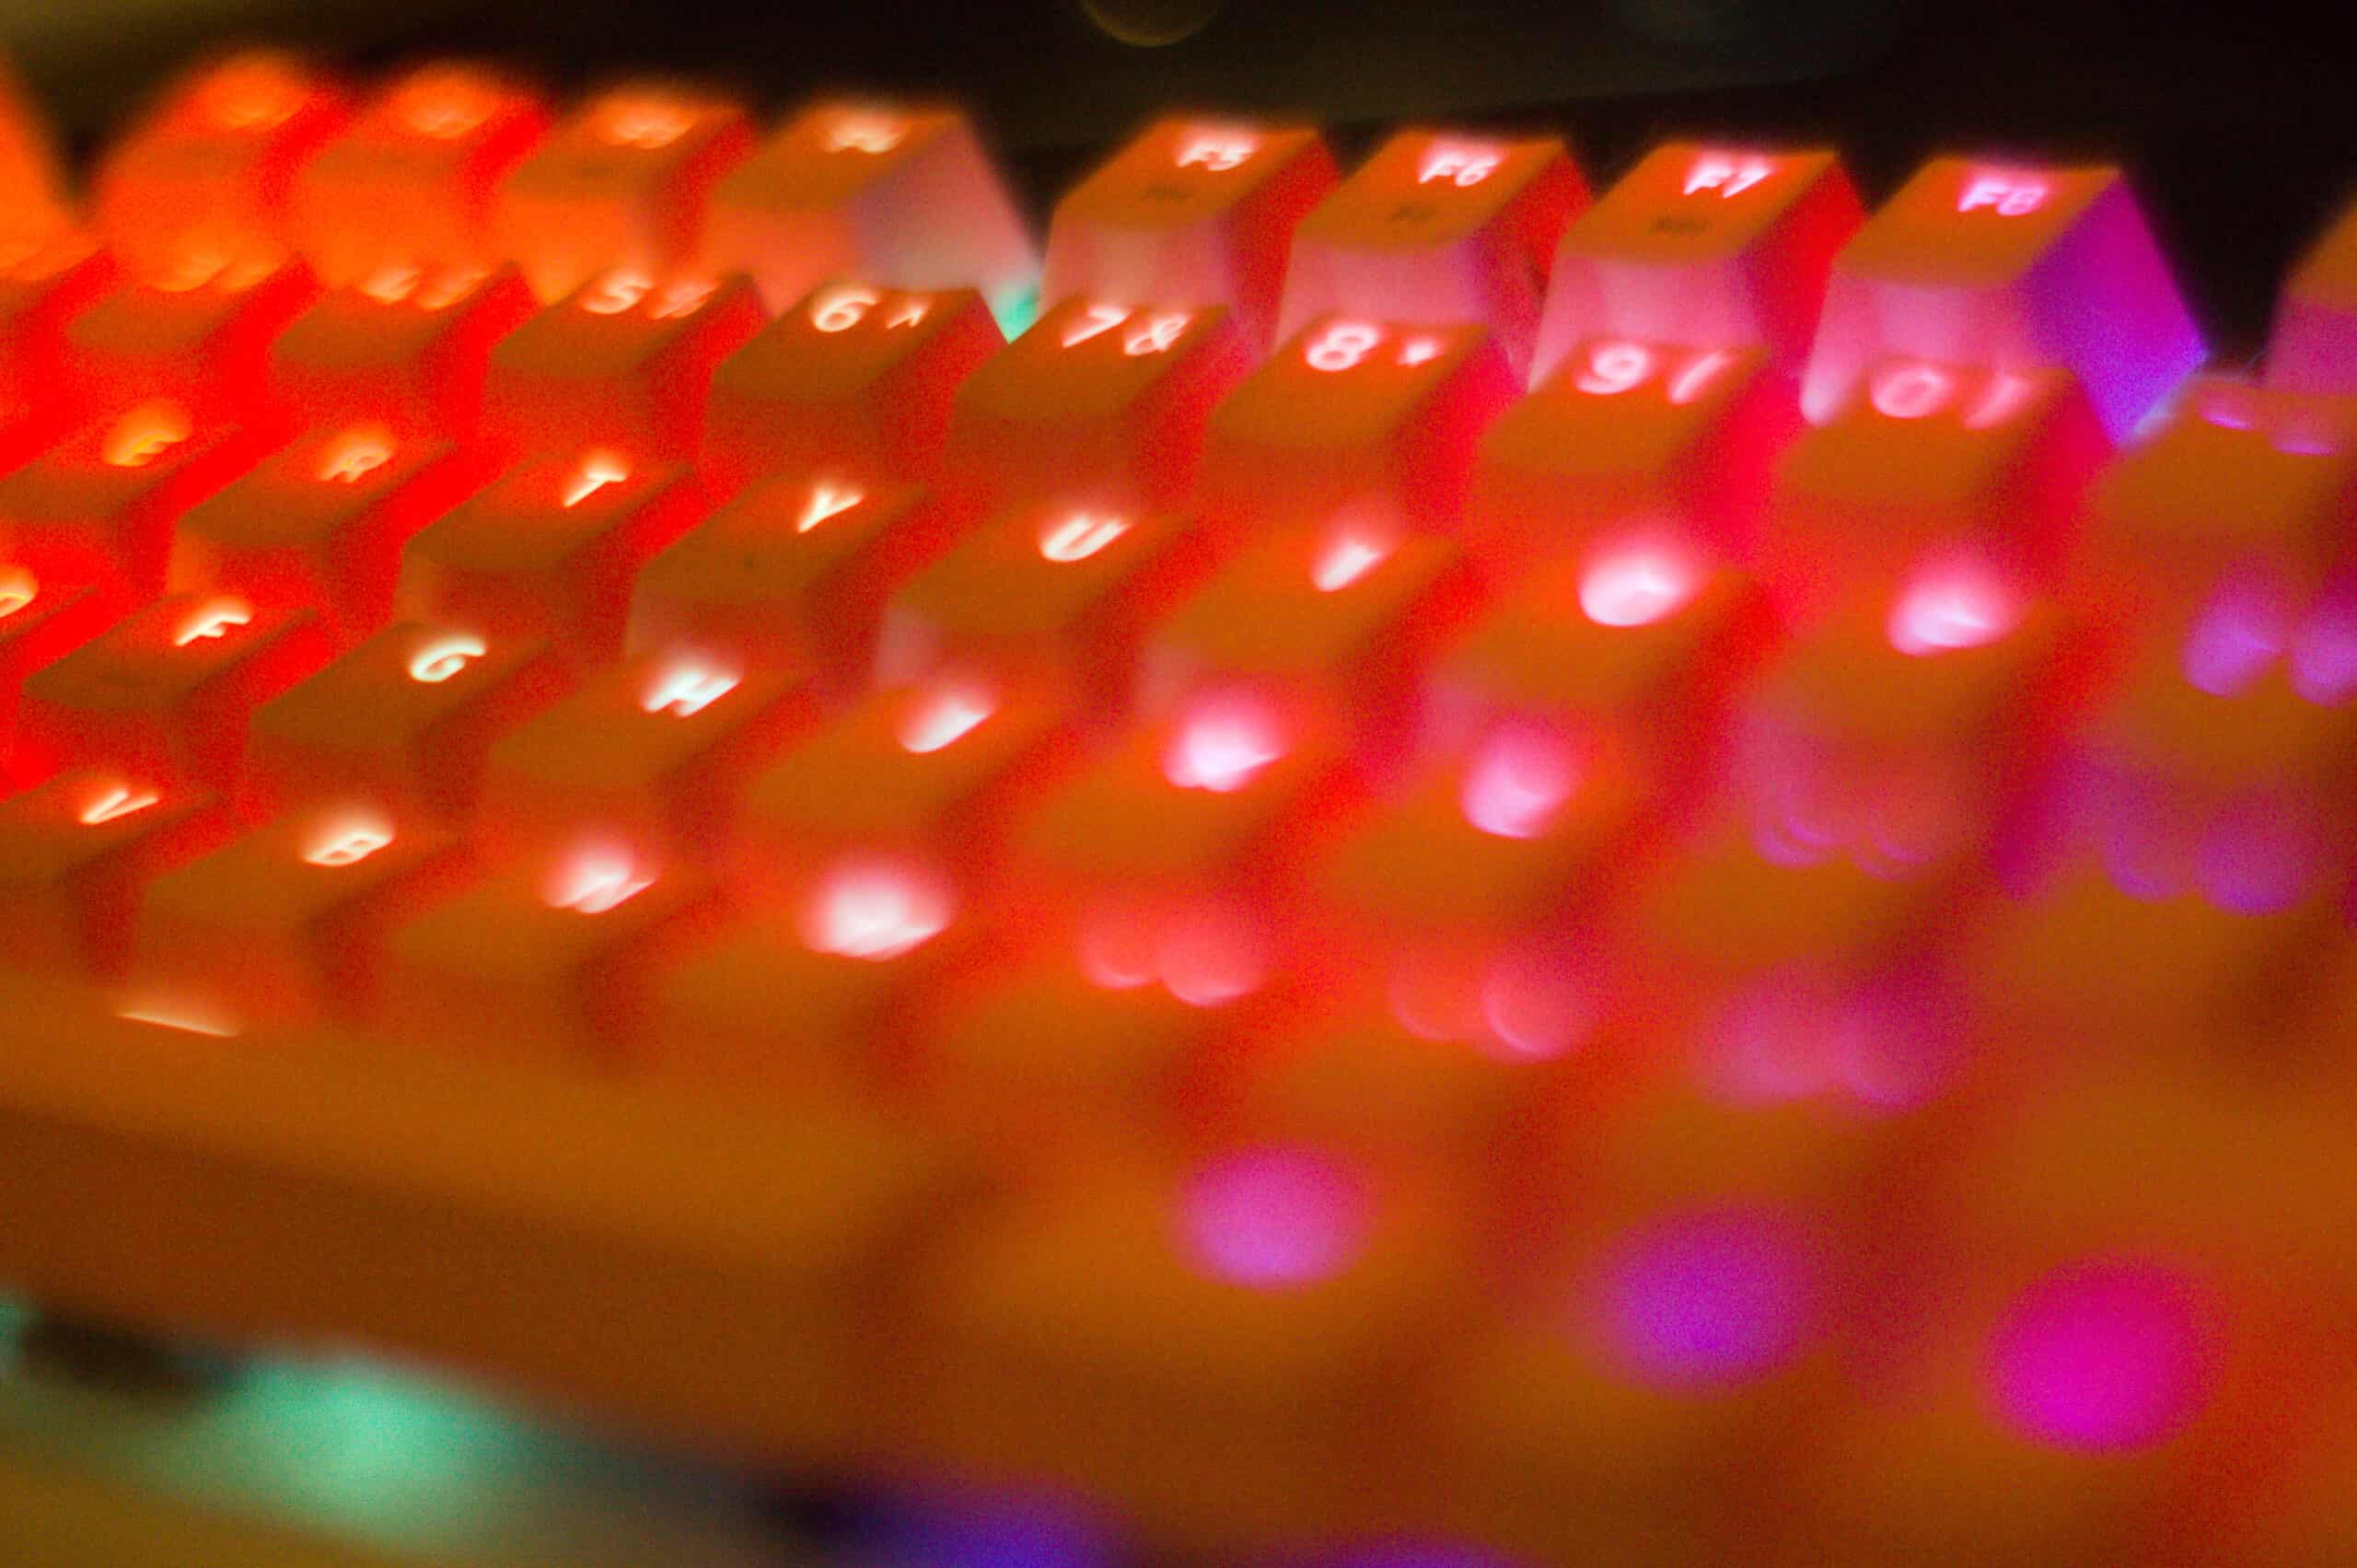 A close up of a Razer BlackWidow X Chroma Mercrury keyboard with pink keycaps and a blurred foreground.